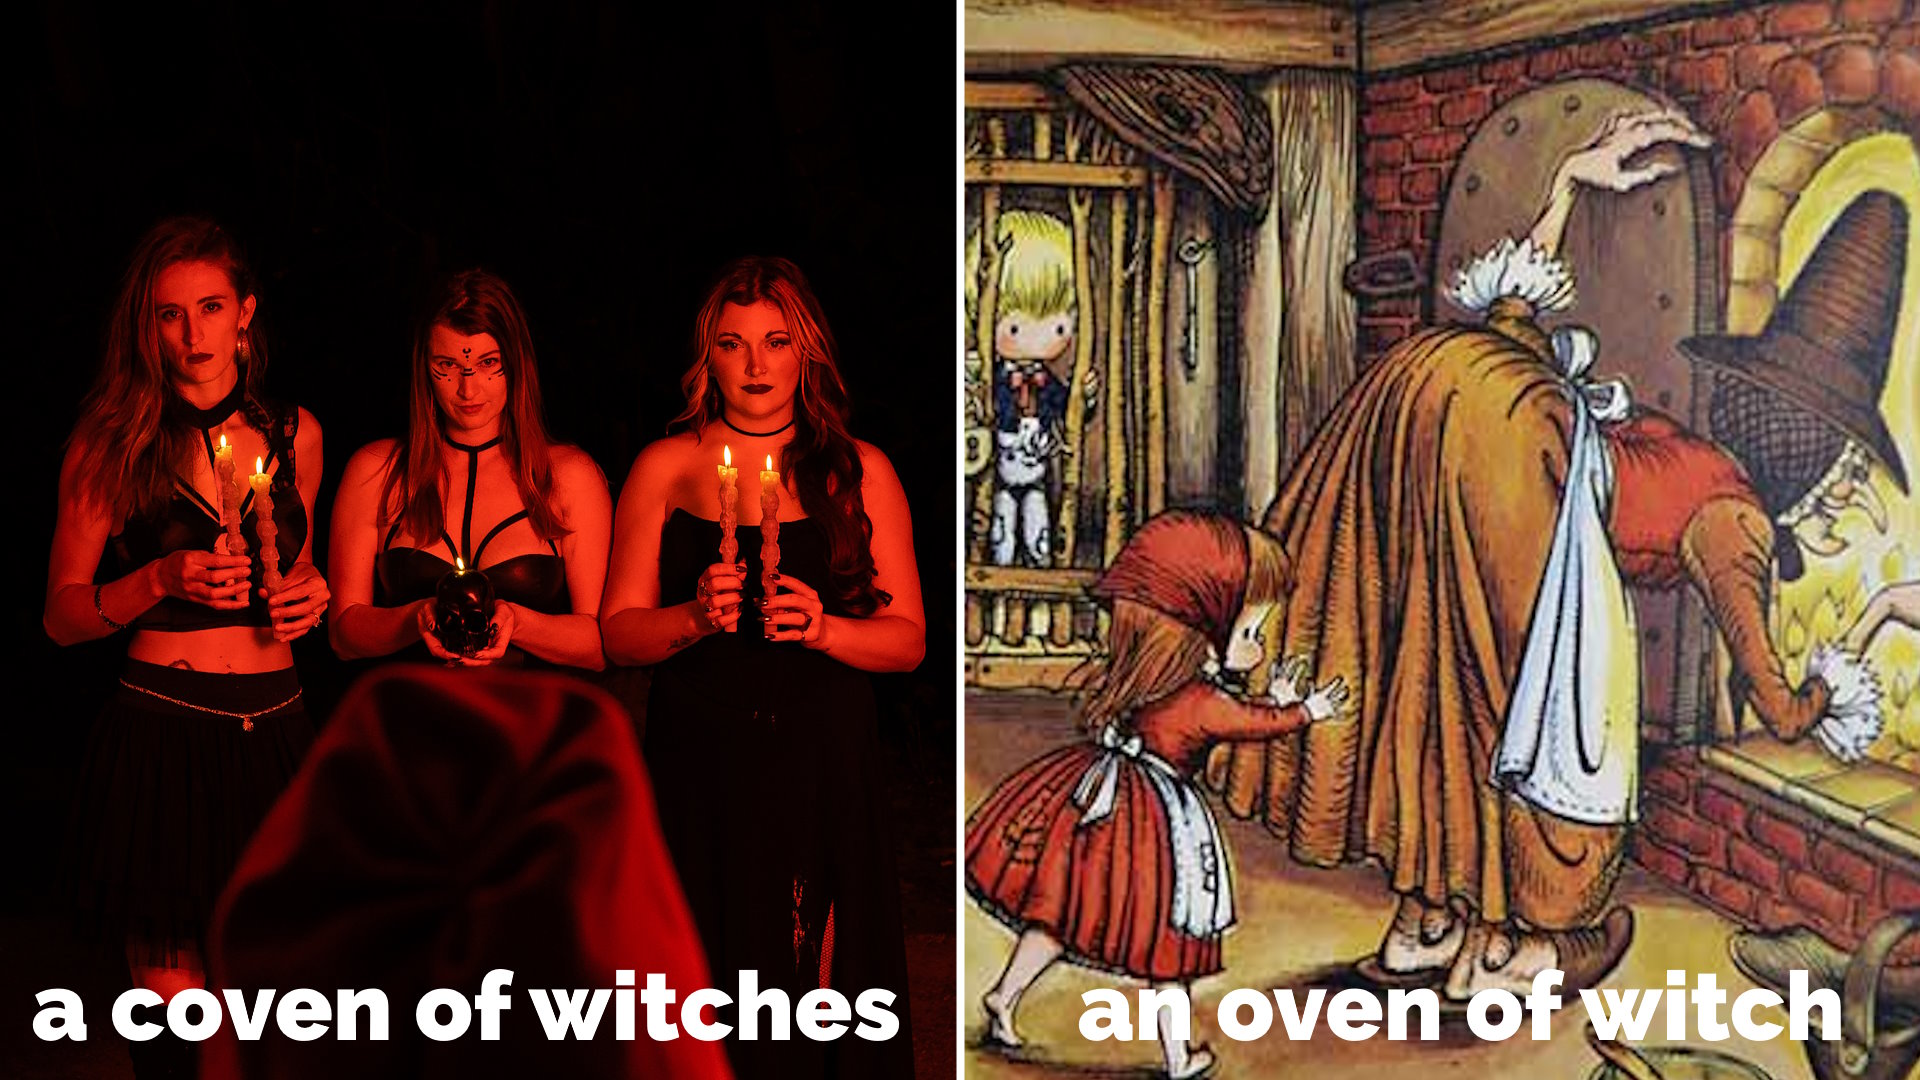 Captioned photos showing "a COVEN of WITCHES" and "an OVEN of WITCH" (the latter picture shows a scene from Handsel & Gretel in which the witch is pushed into the oven).